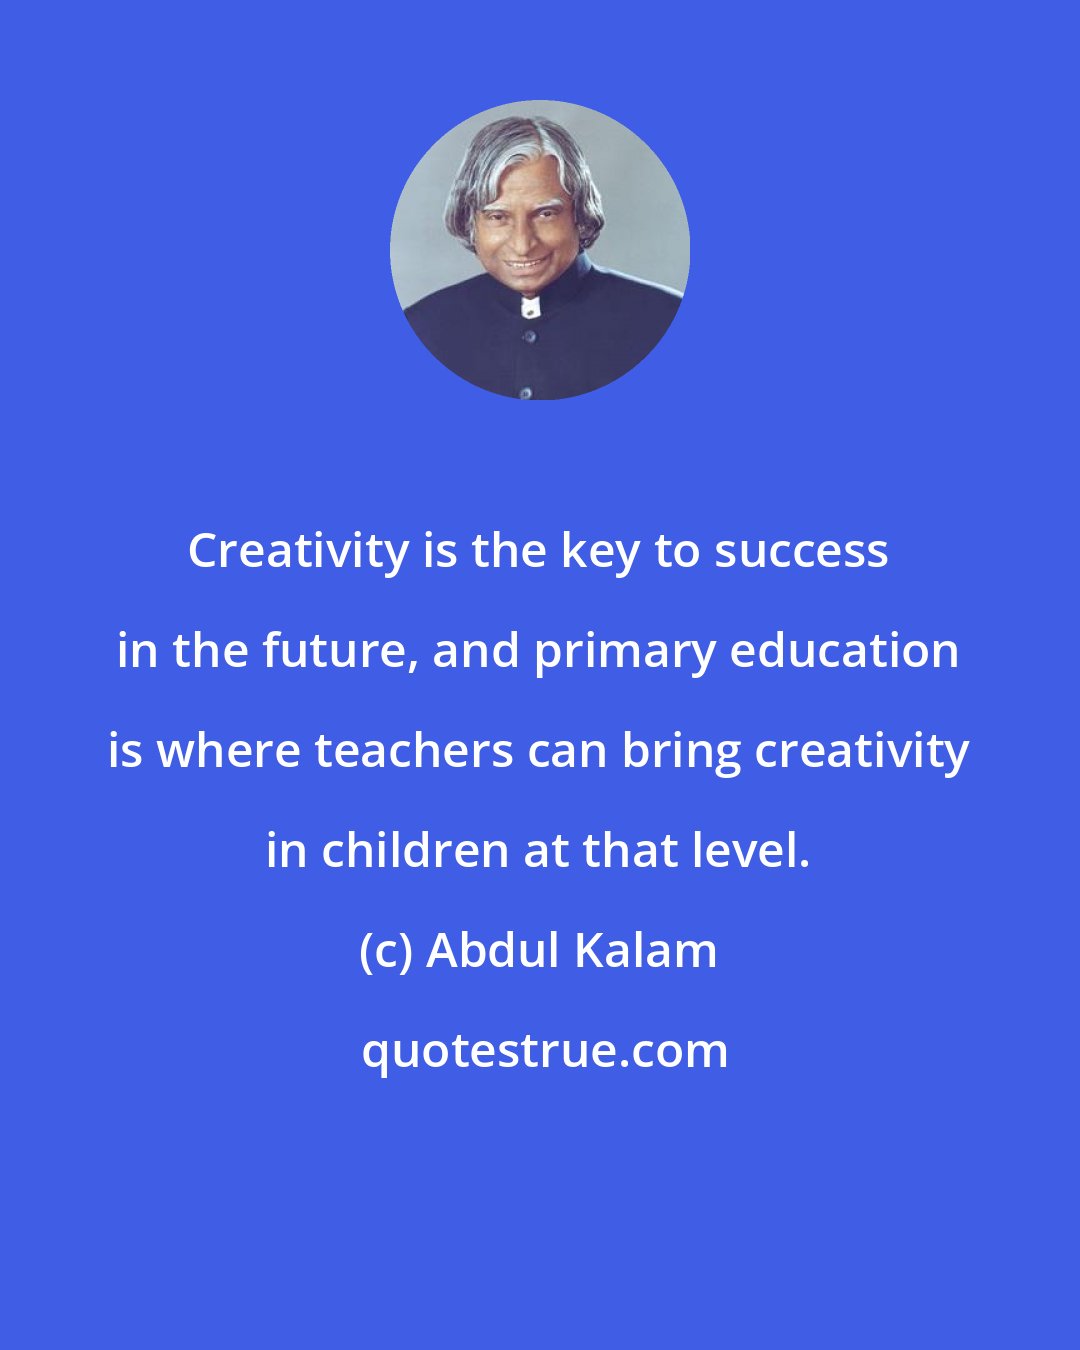 Abdul Kalam: Creativity is the key to success in the future, and primary education is where teachers can bring creativity in children at that level.